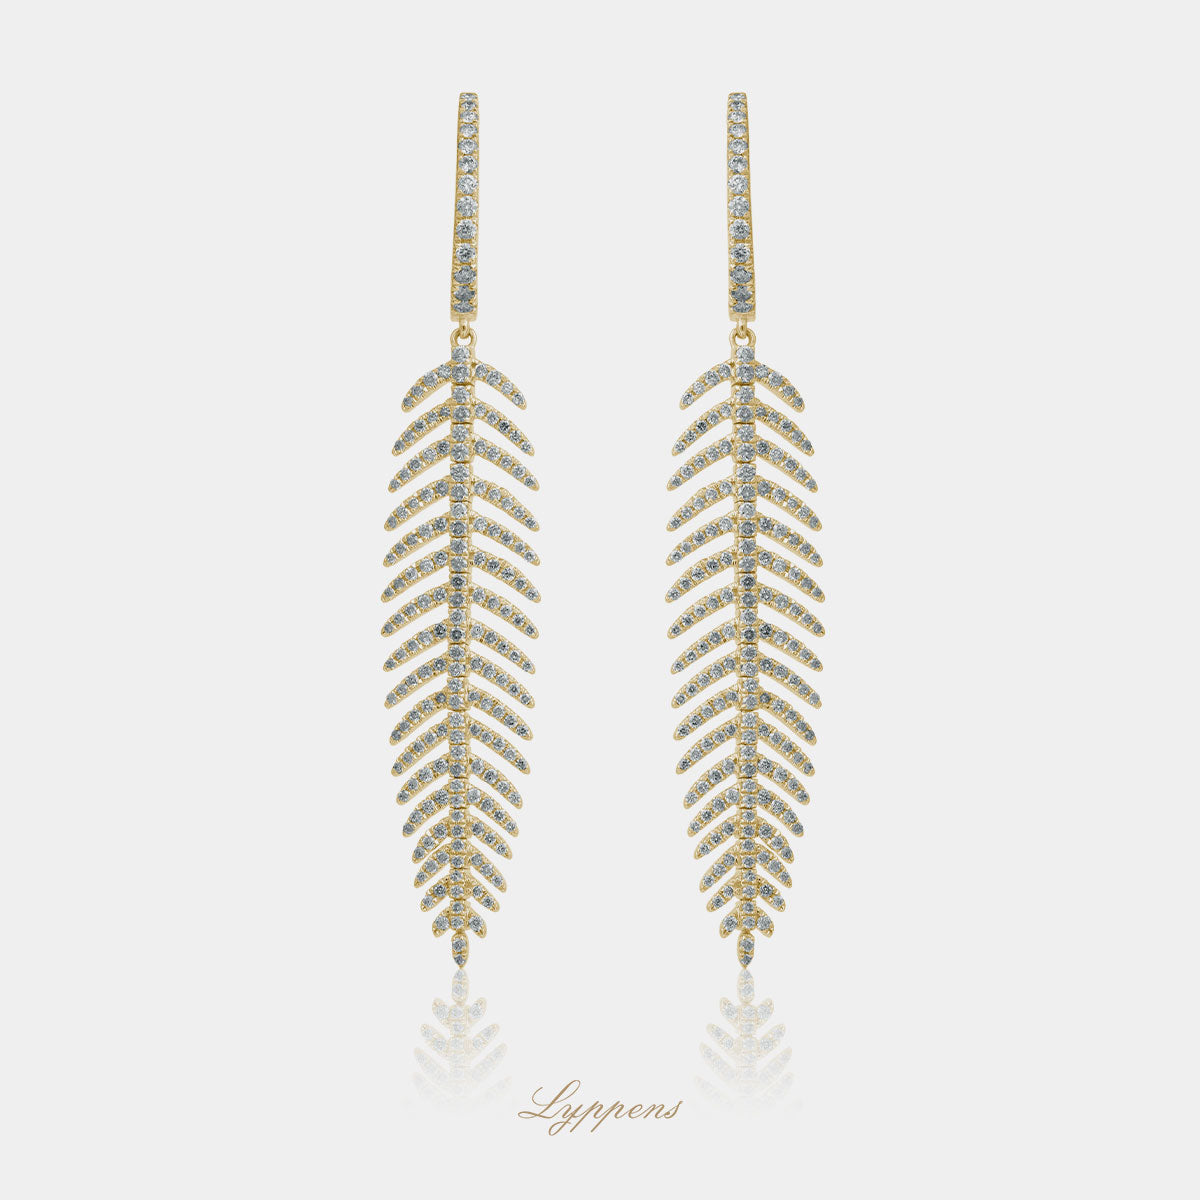 Yellow gold feather earrings with diamonds